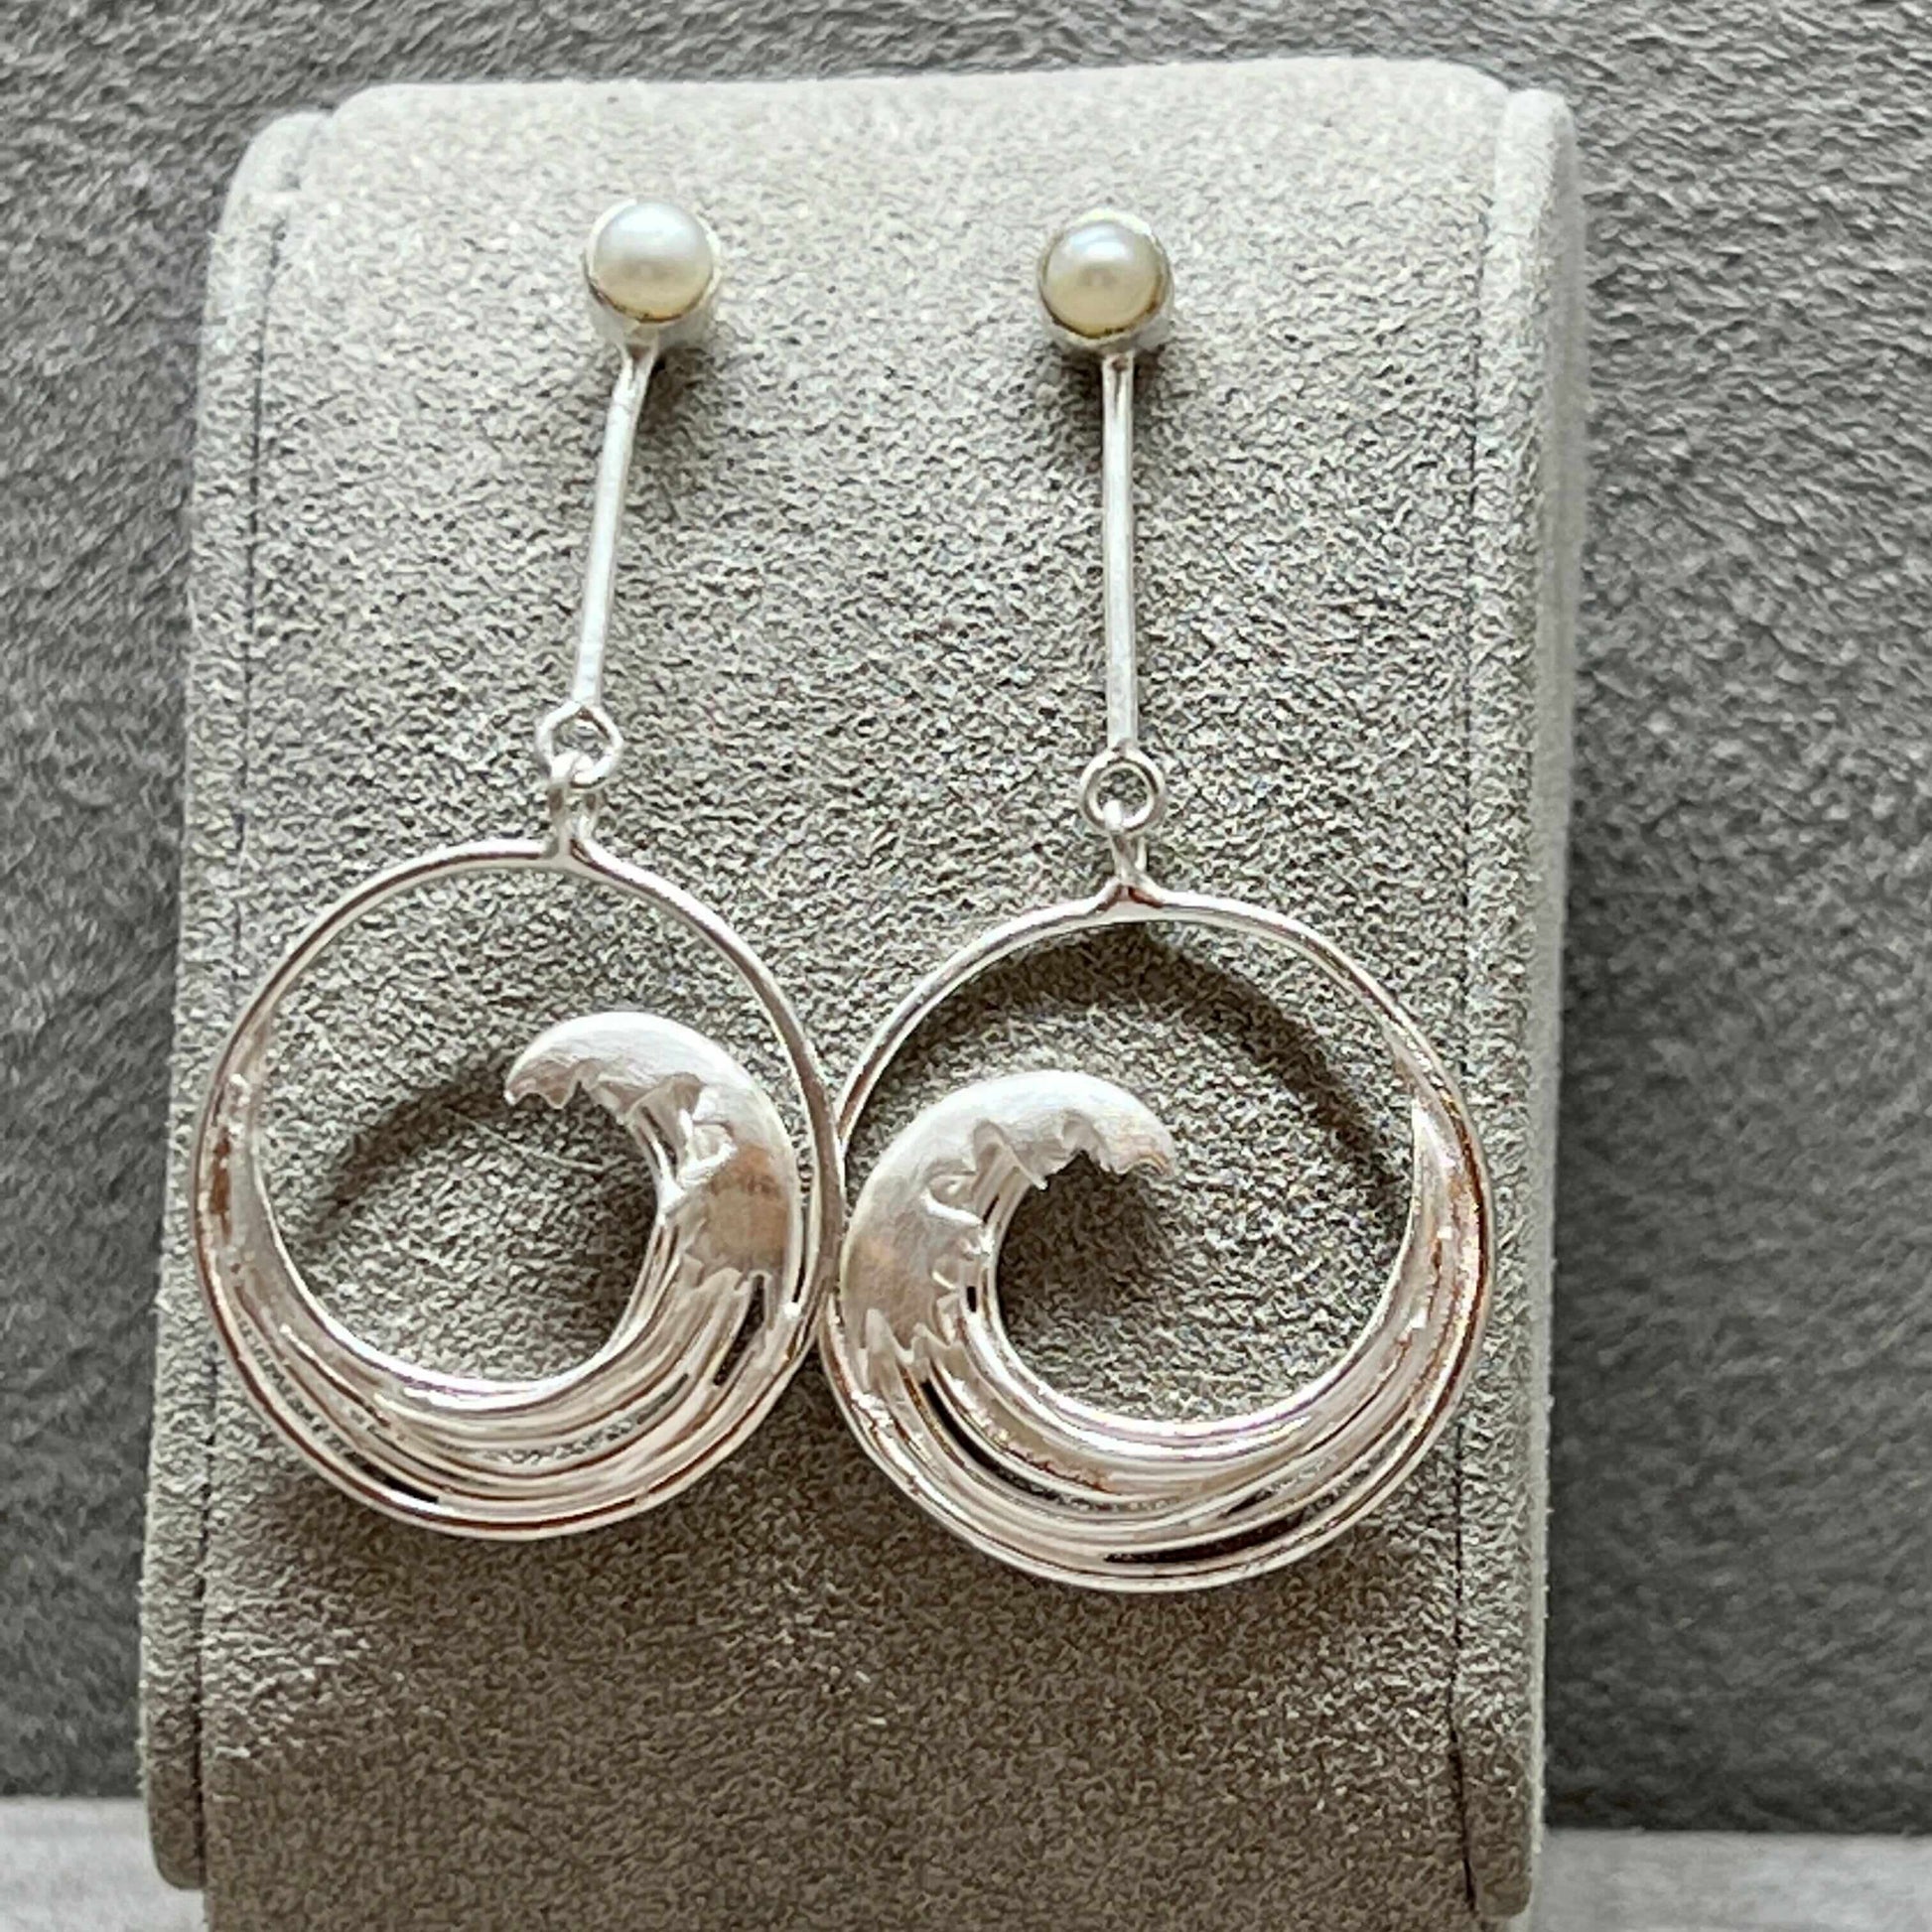 Japanese Inspired Hokusai The Great Wave Sterling Silver & Pearl Long Earrings - Twelve Silver Trees